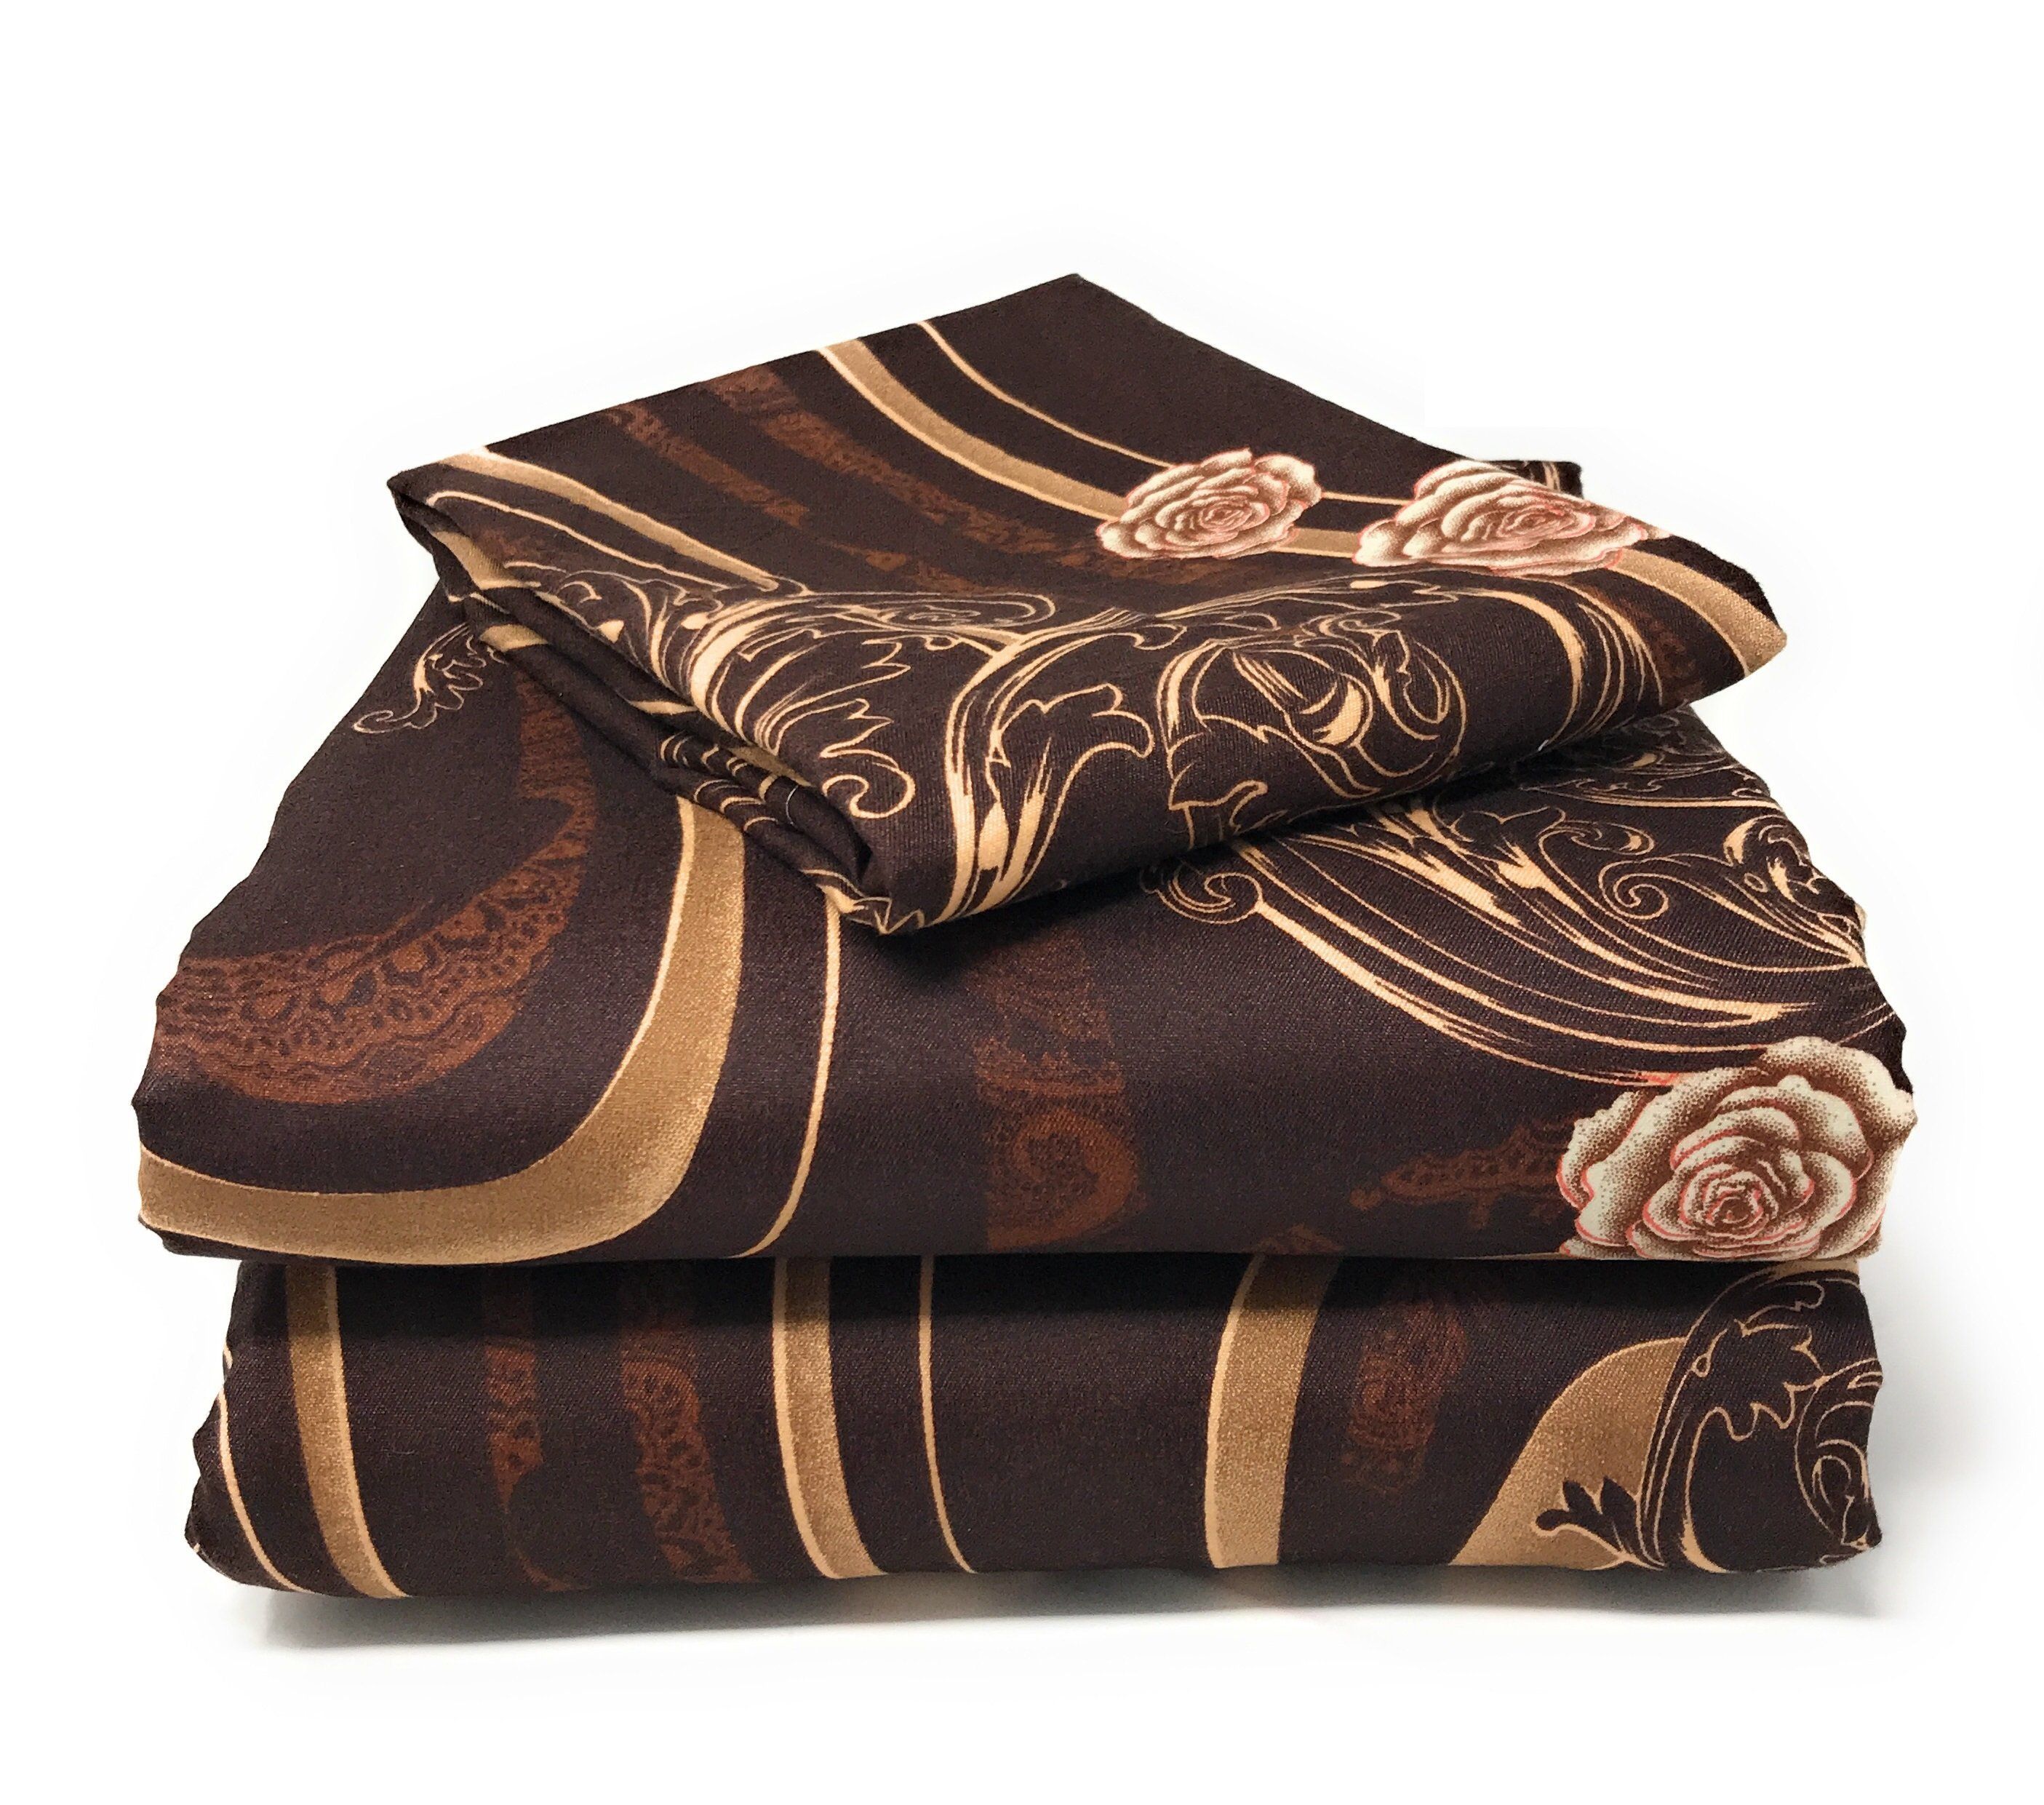 Tache Melted Gold Brown Floral Bed Sheet Set (2815FITFLT) - Tache Home Fashion